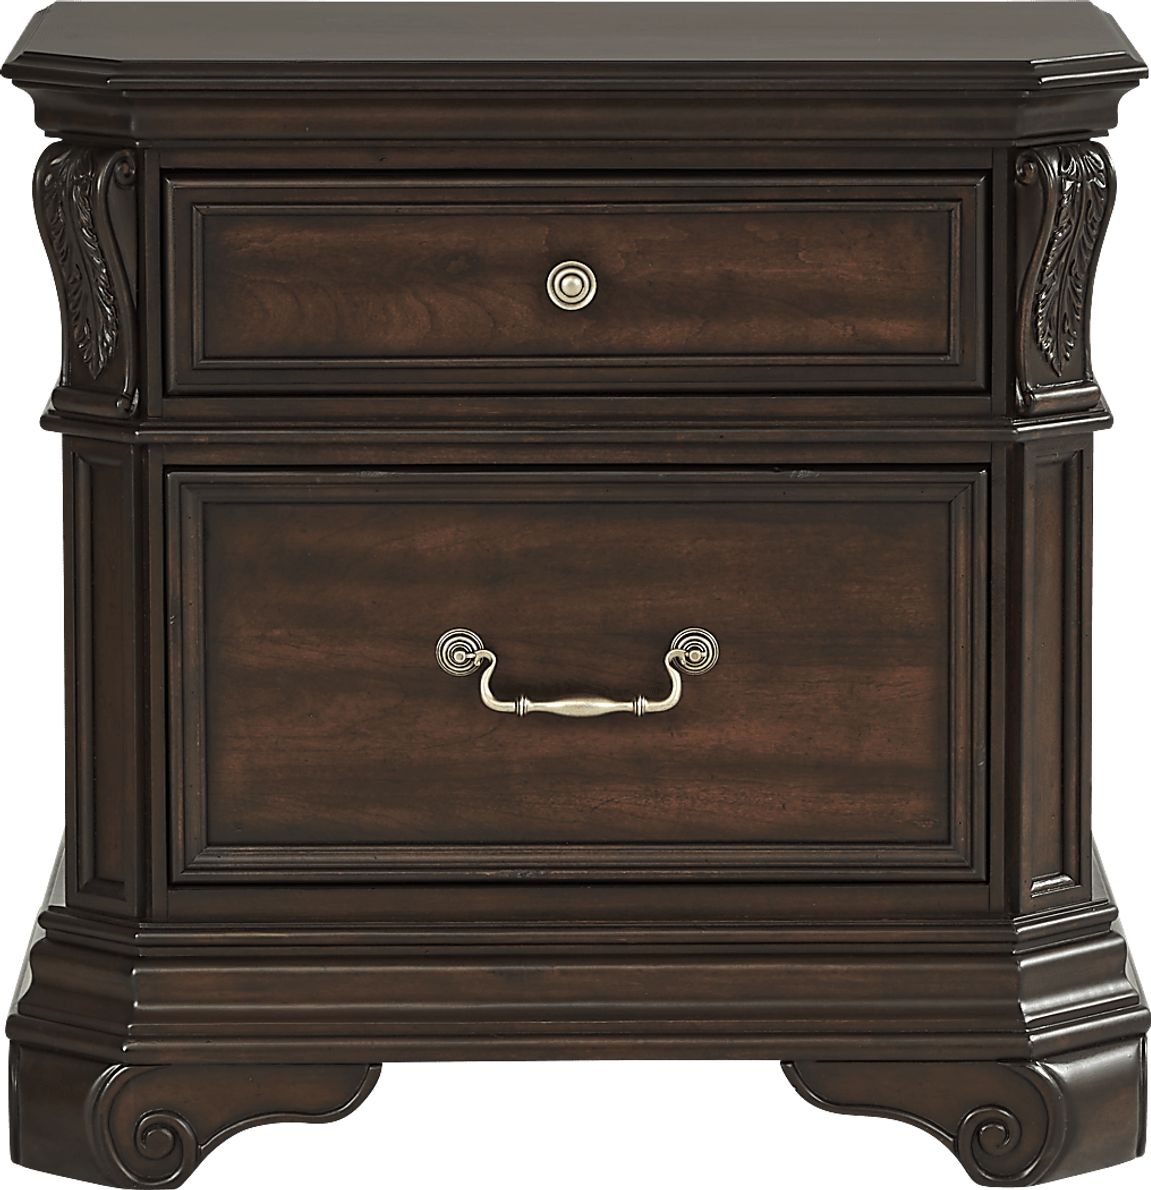 https://assets.roomstogo.com/product/oakmont-brown-cherry-nightstand-with-led-light-and-usb-charging_32522573_image-item?cache-id=b5ee96d17a4107503601e1bb72484ee0&h=1190&w=1190